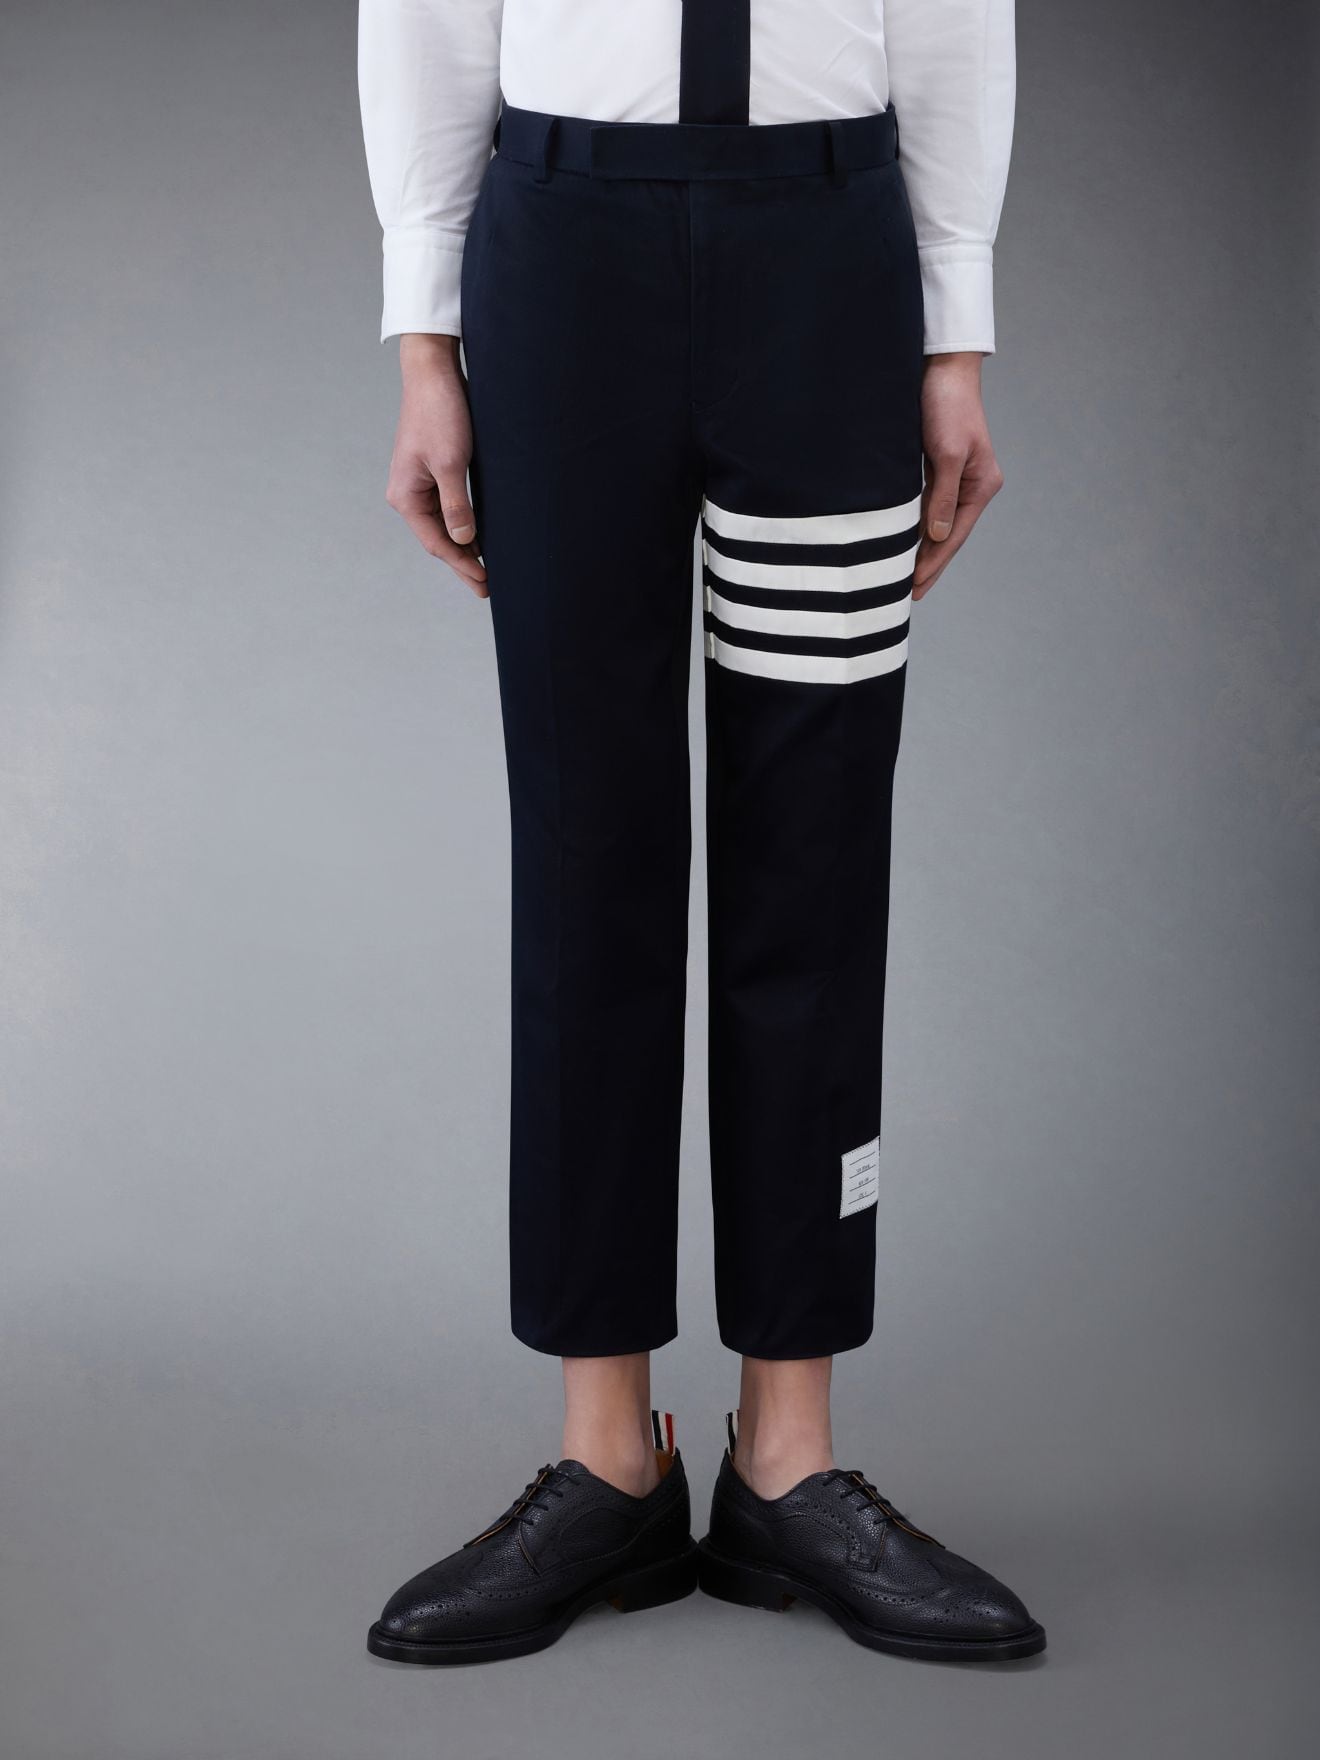 Navy Cotton Twill Knit Seamed 4 bar Unconstructed Chino Trouser   Thom  Browne